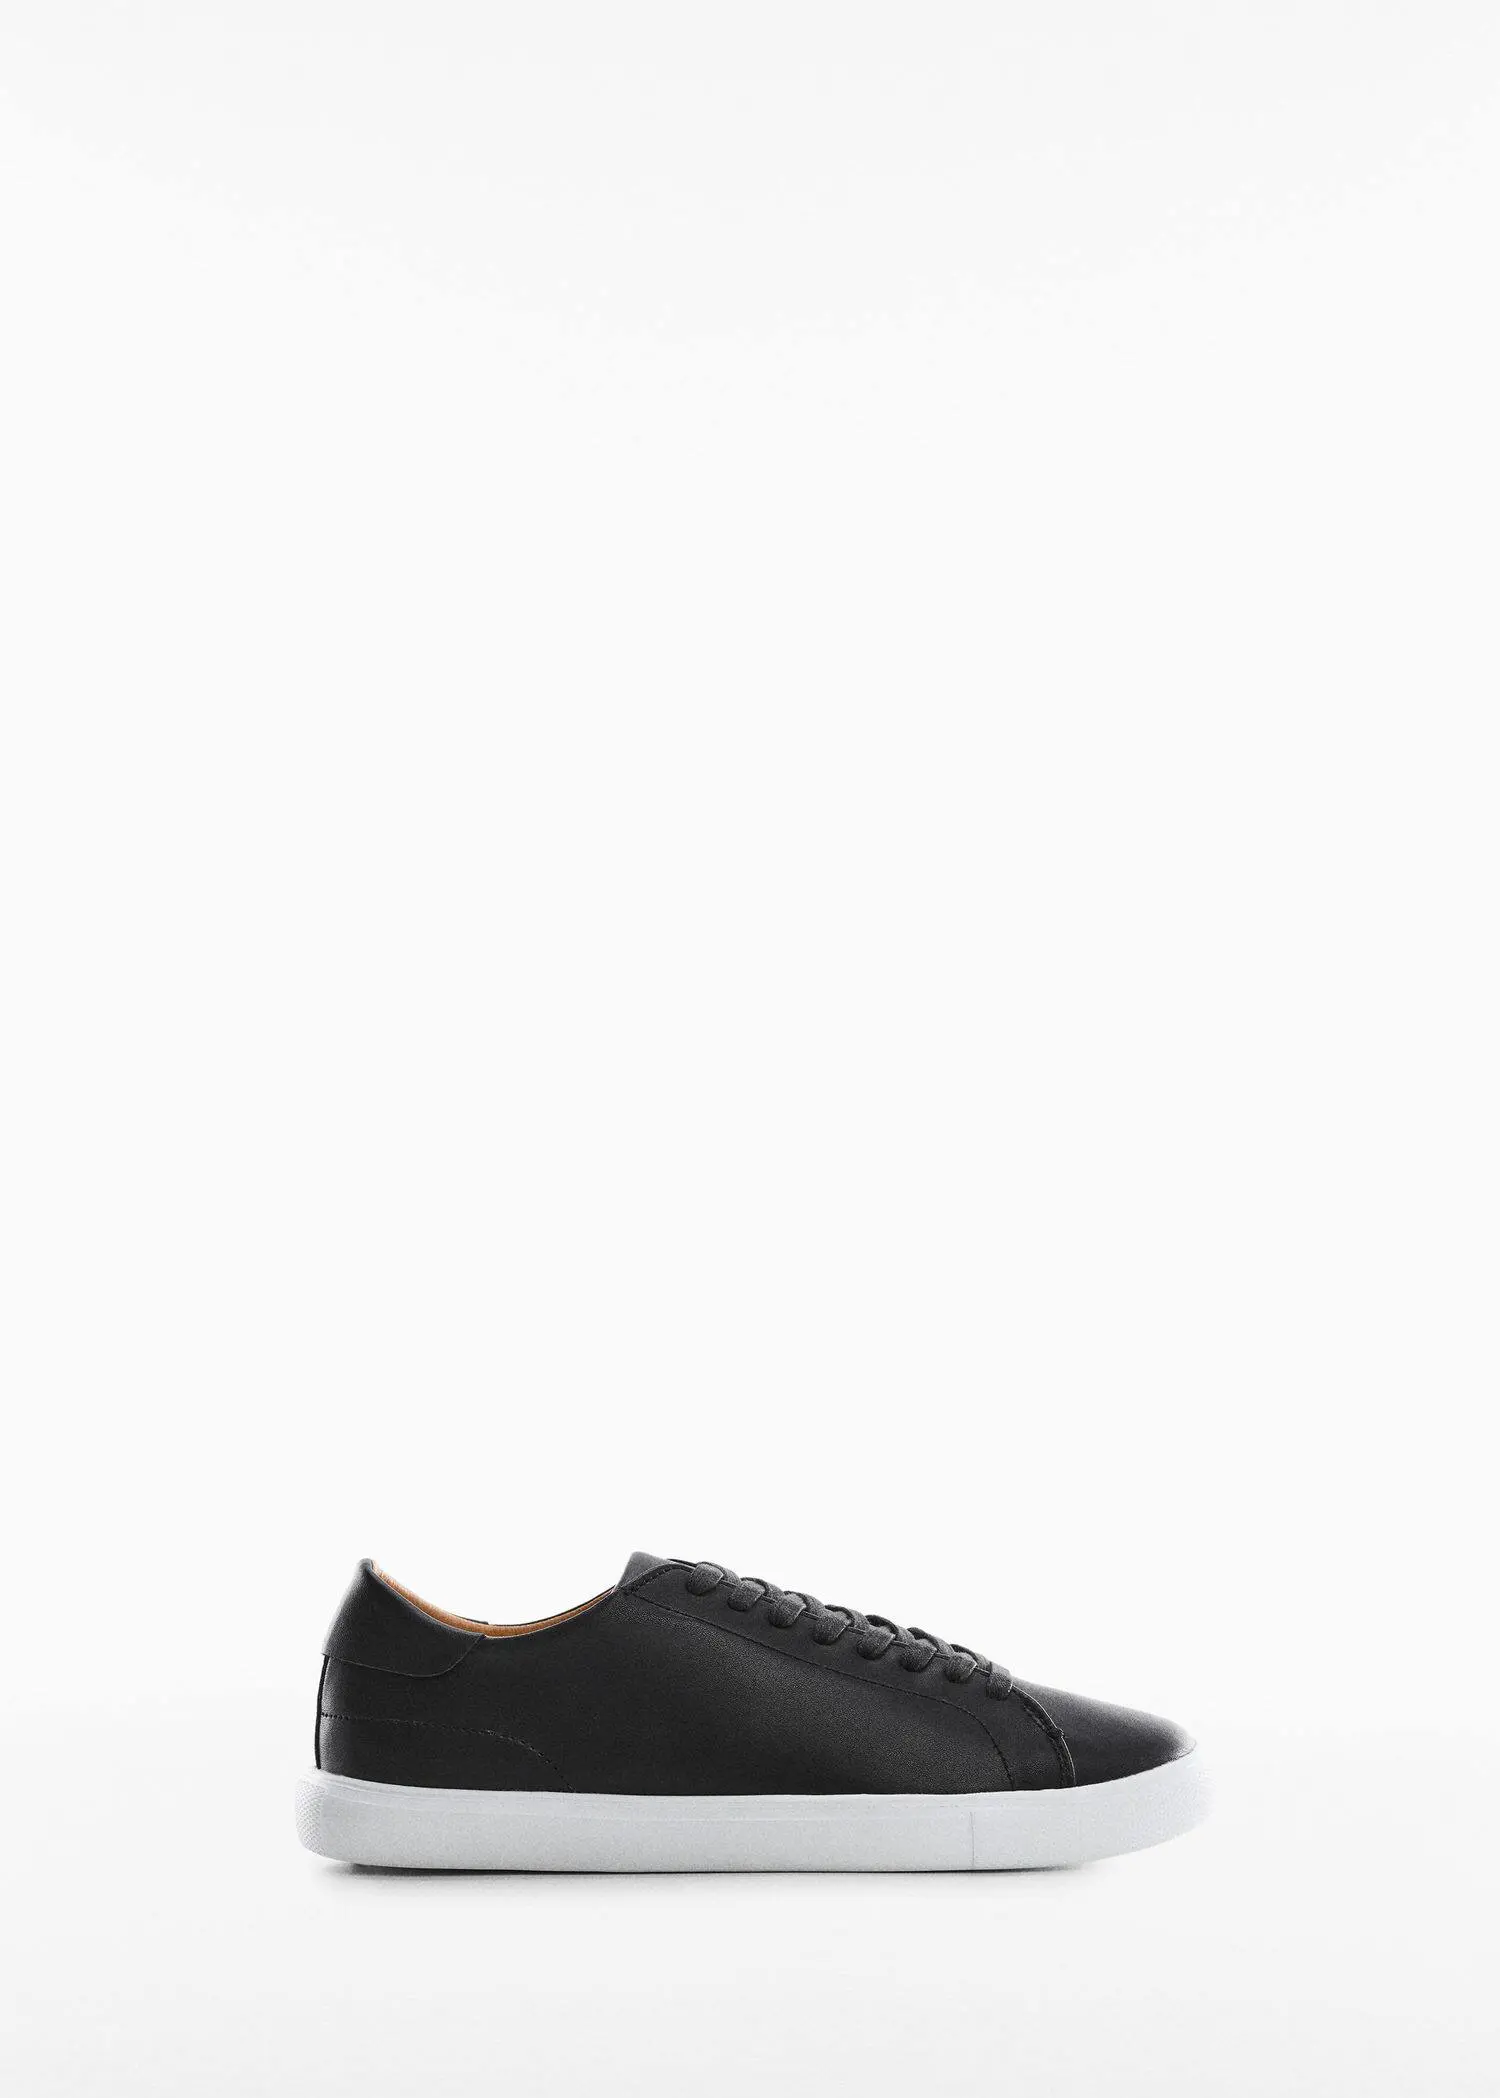 Mango Noncolored leather sneakers. a pair of black shoes on a white background. 